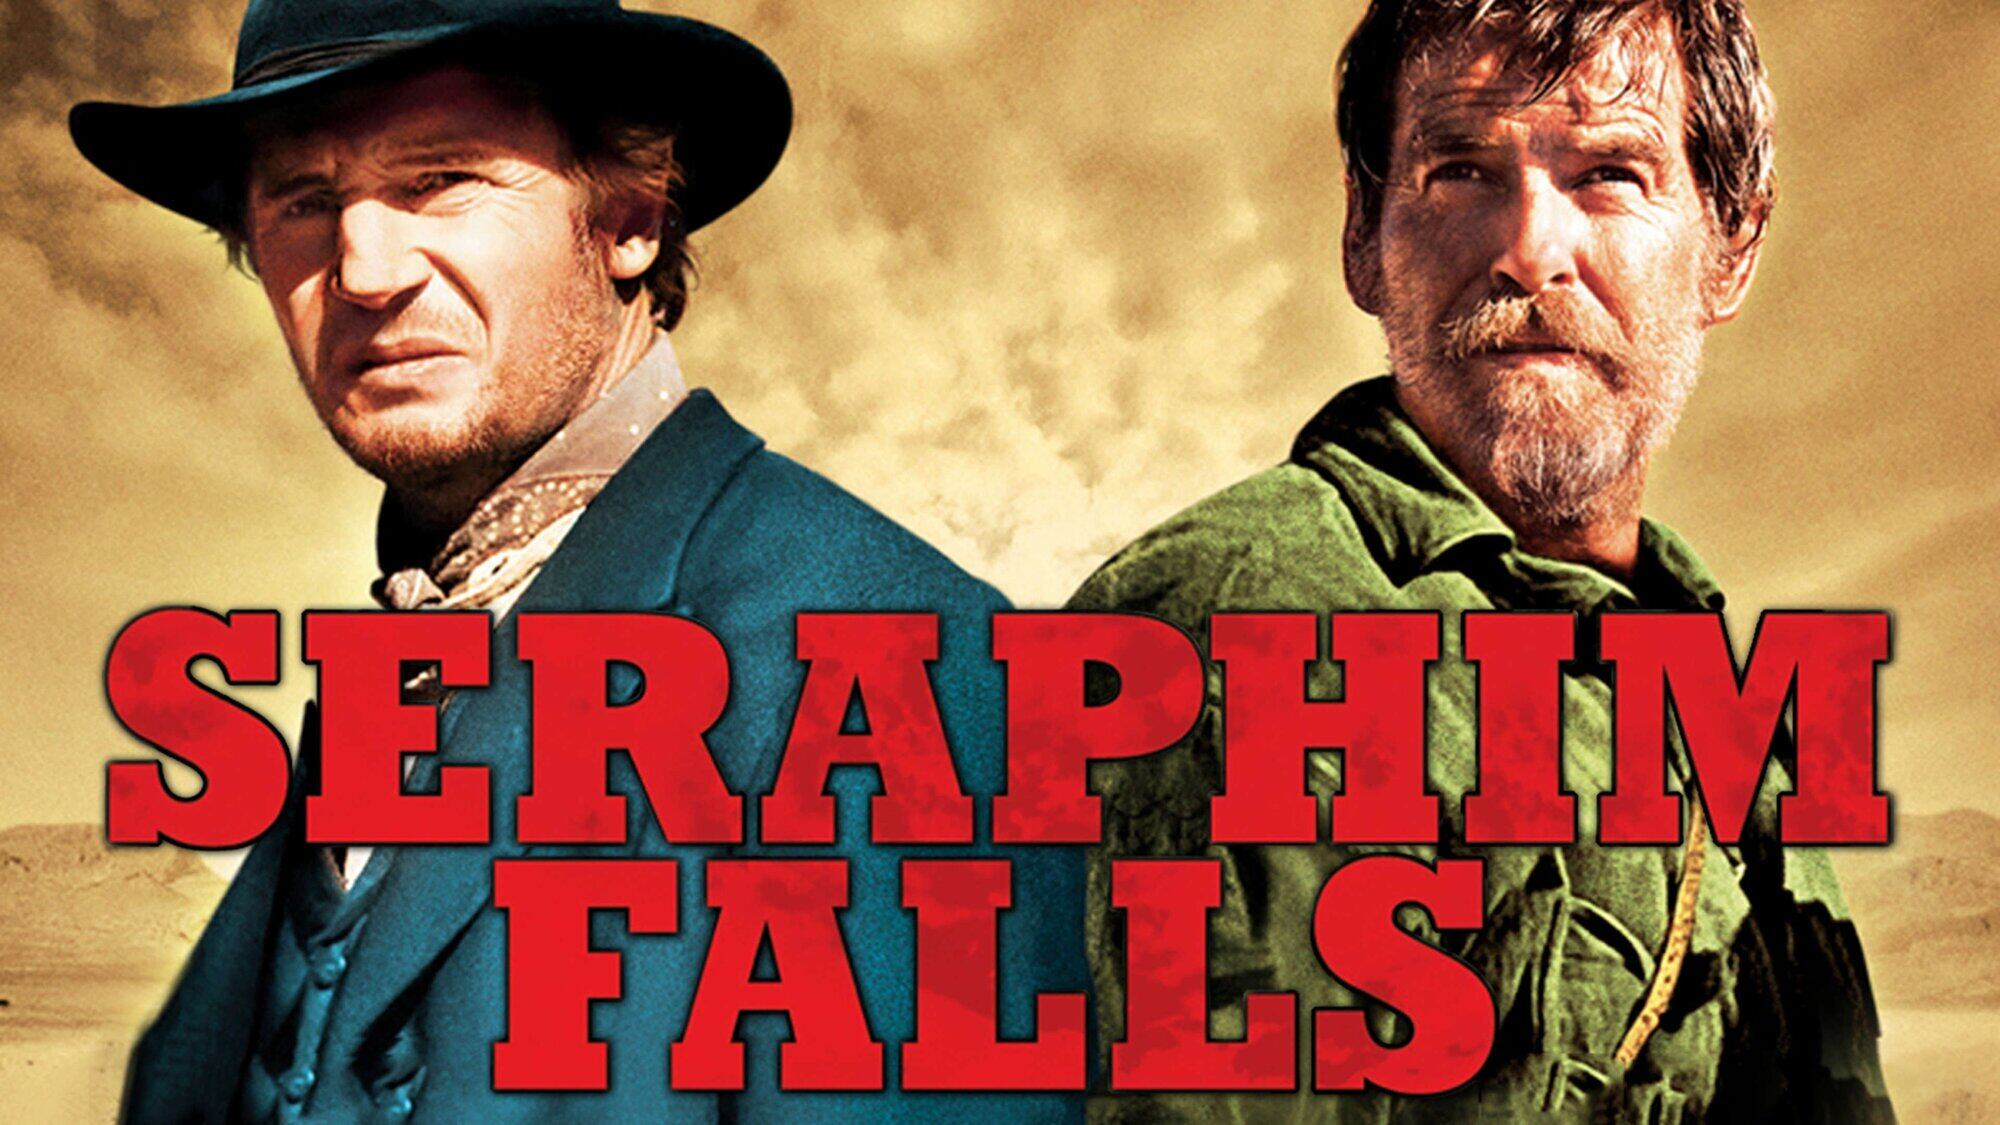 43-facts-about-the-movie-seraphim-falls